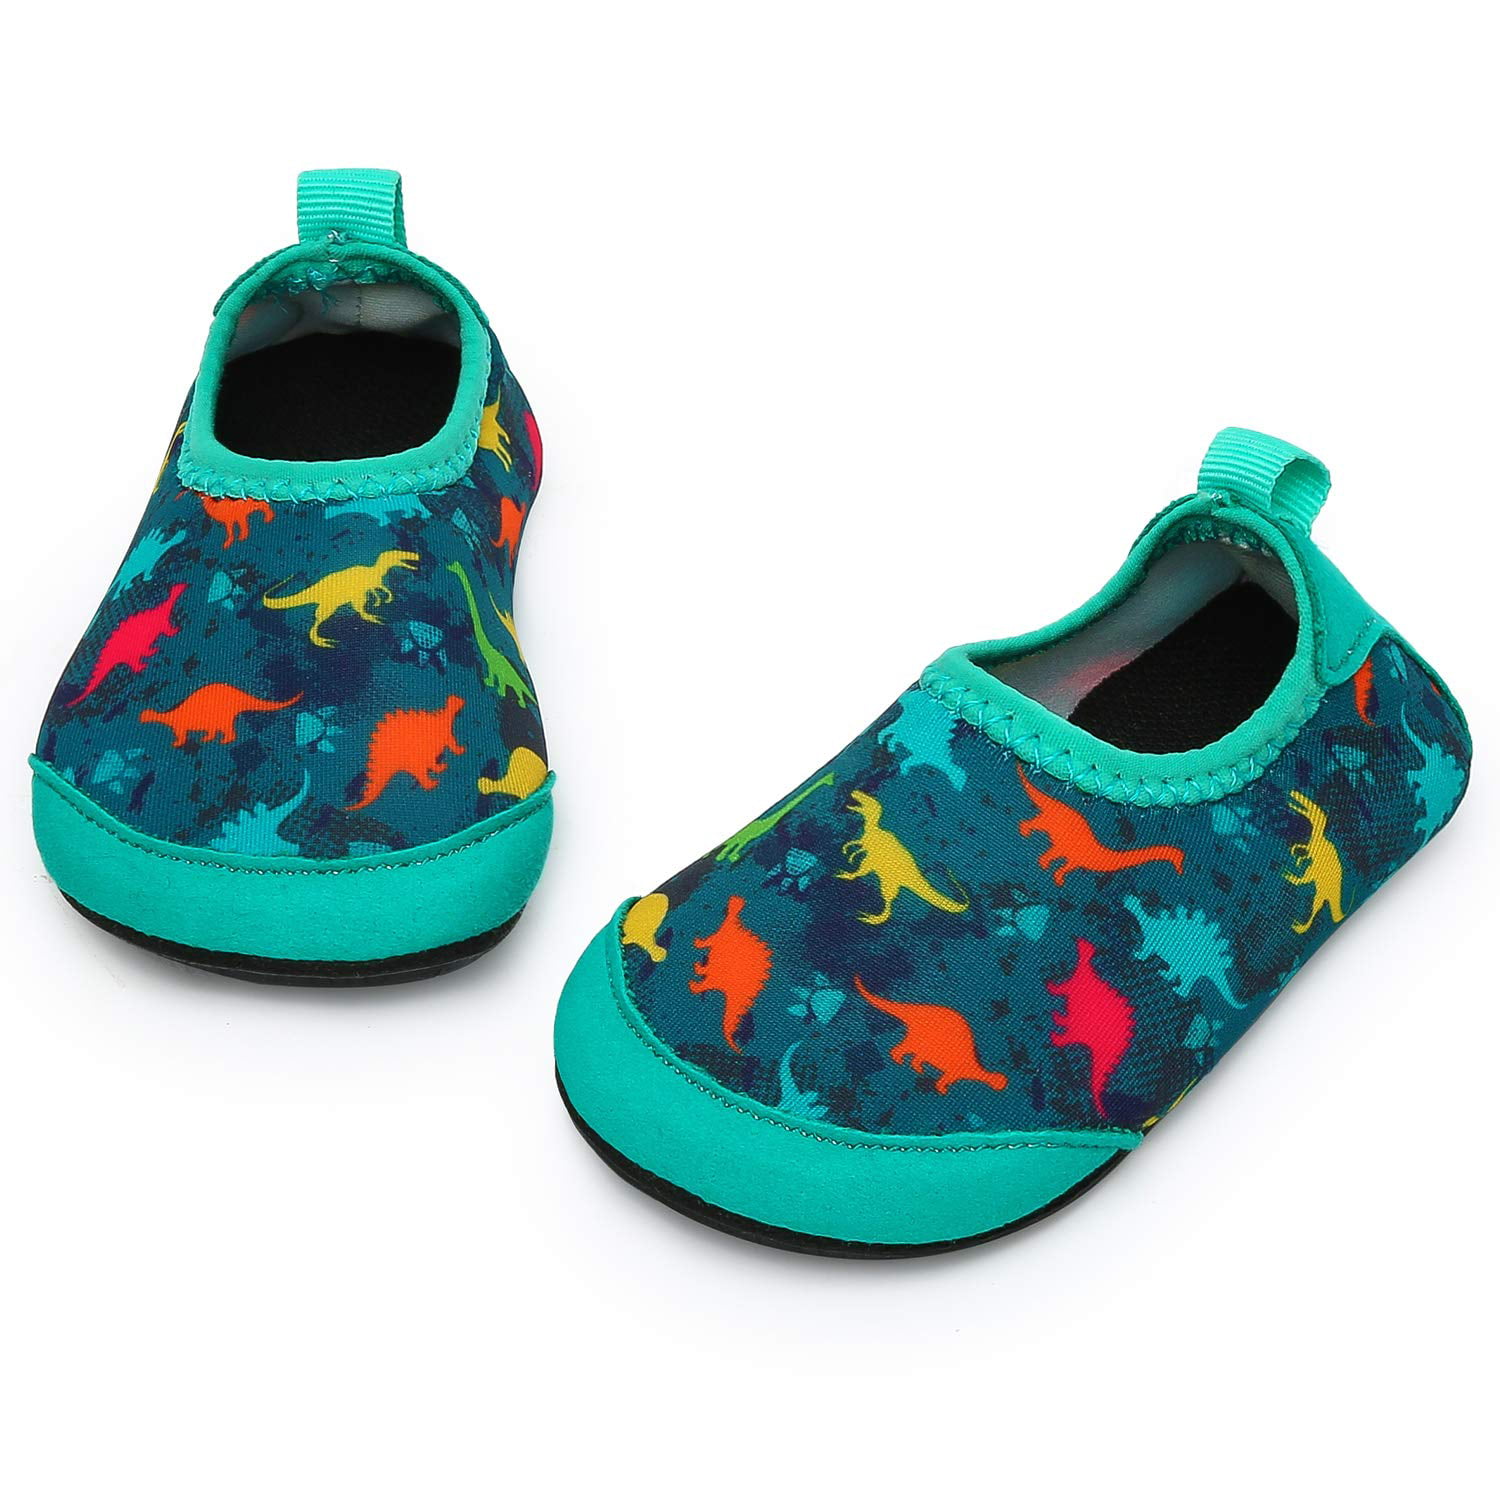 Crova Baby Boys Girls Water Shoes Barefoot Swim Shoes Toddler Beach Sandals Sneakers Kids 